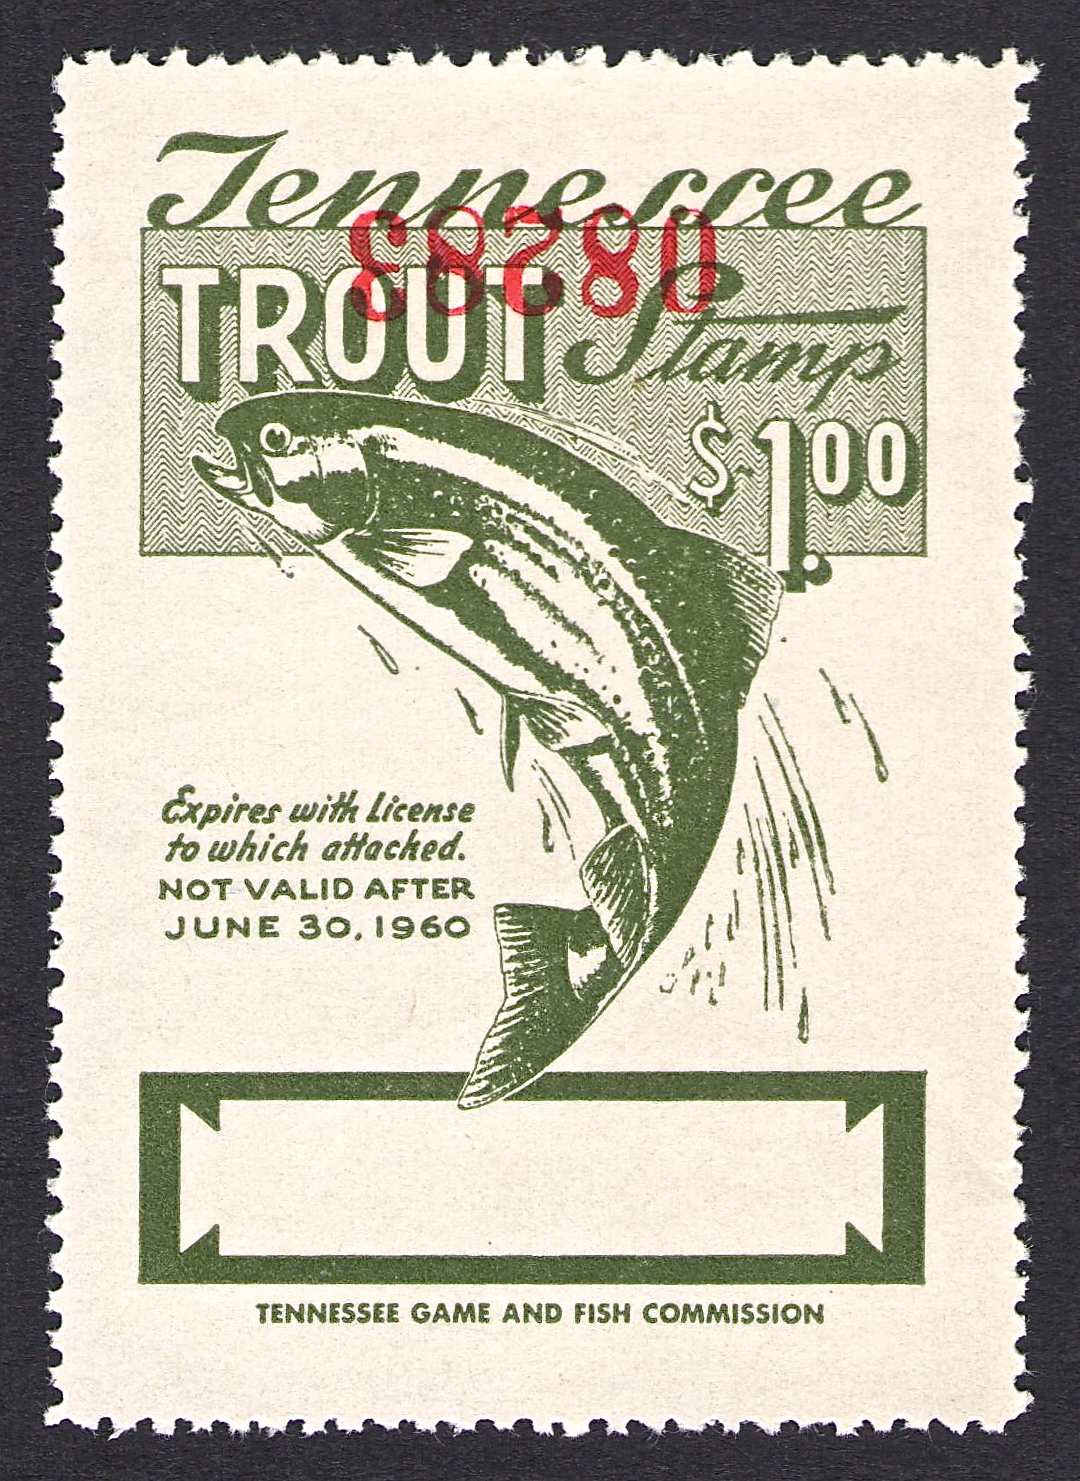 1959-60 Tennessee Trout Error - Inverted Serial #